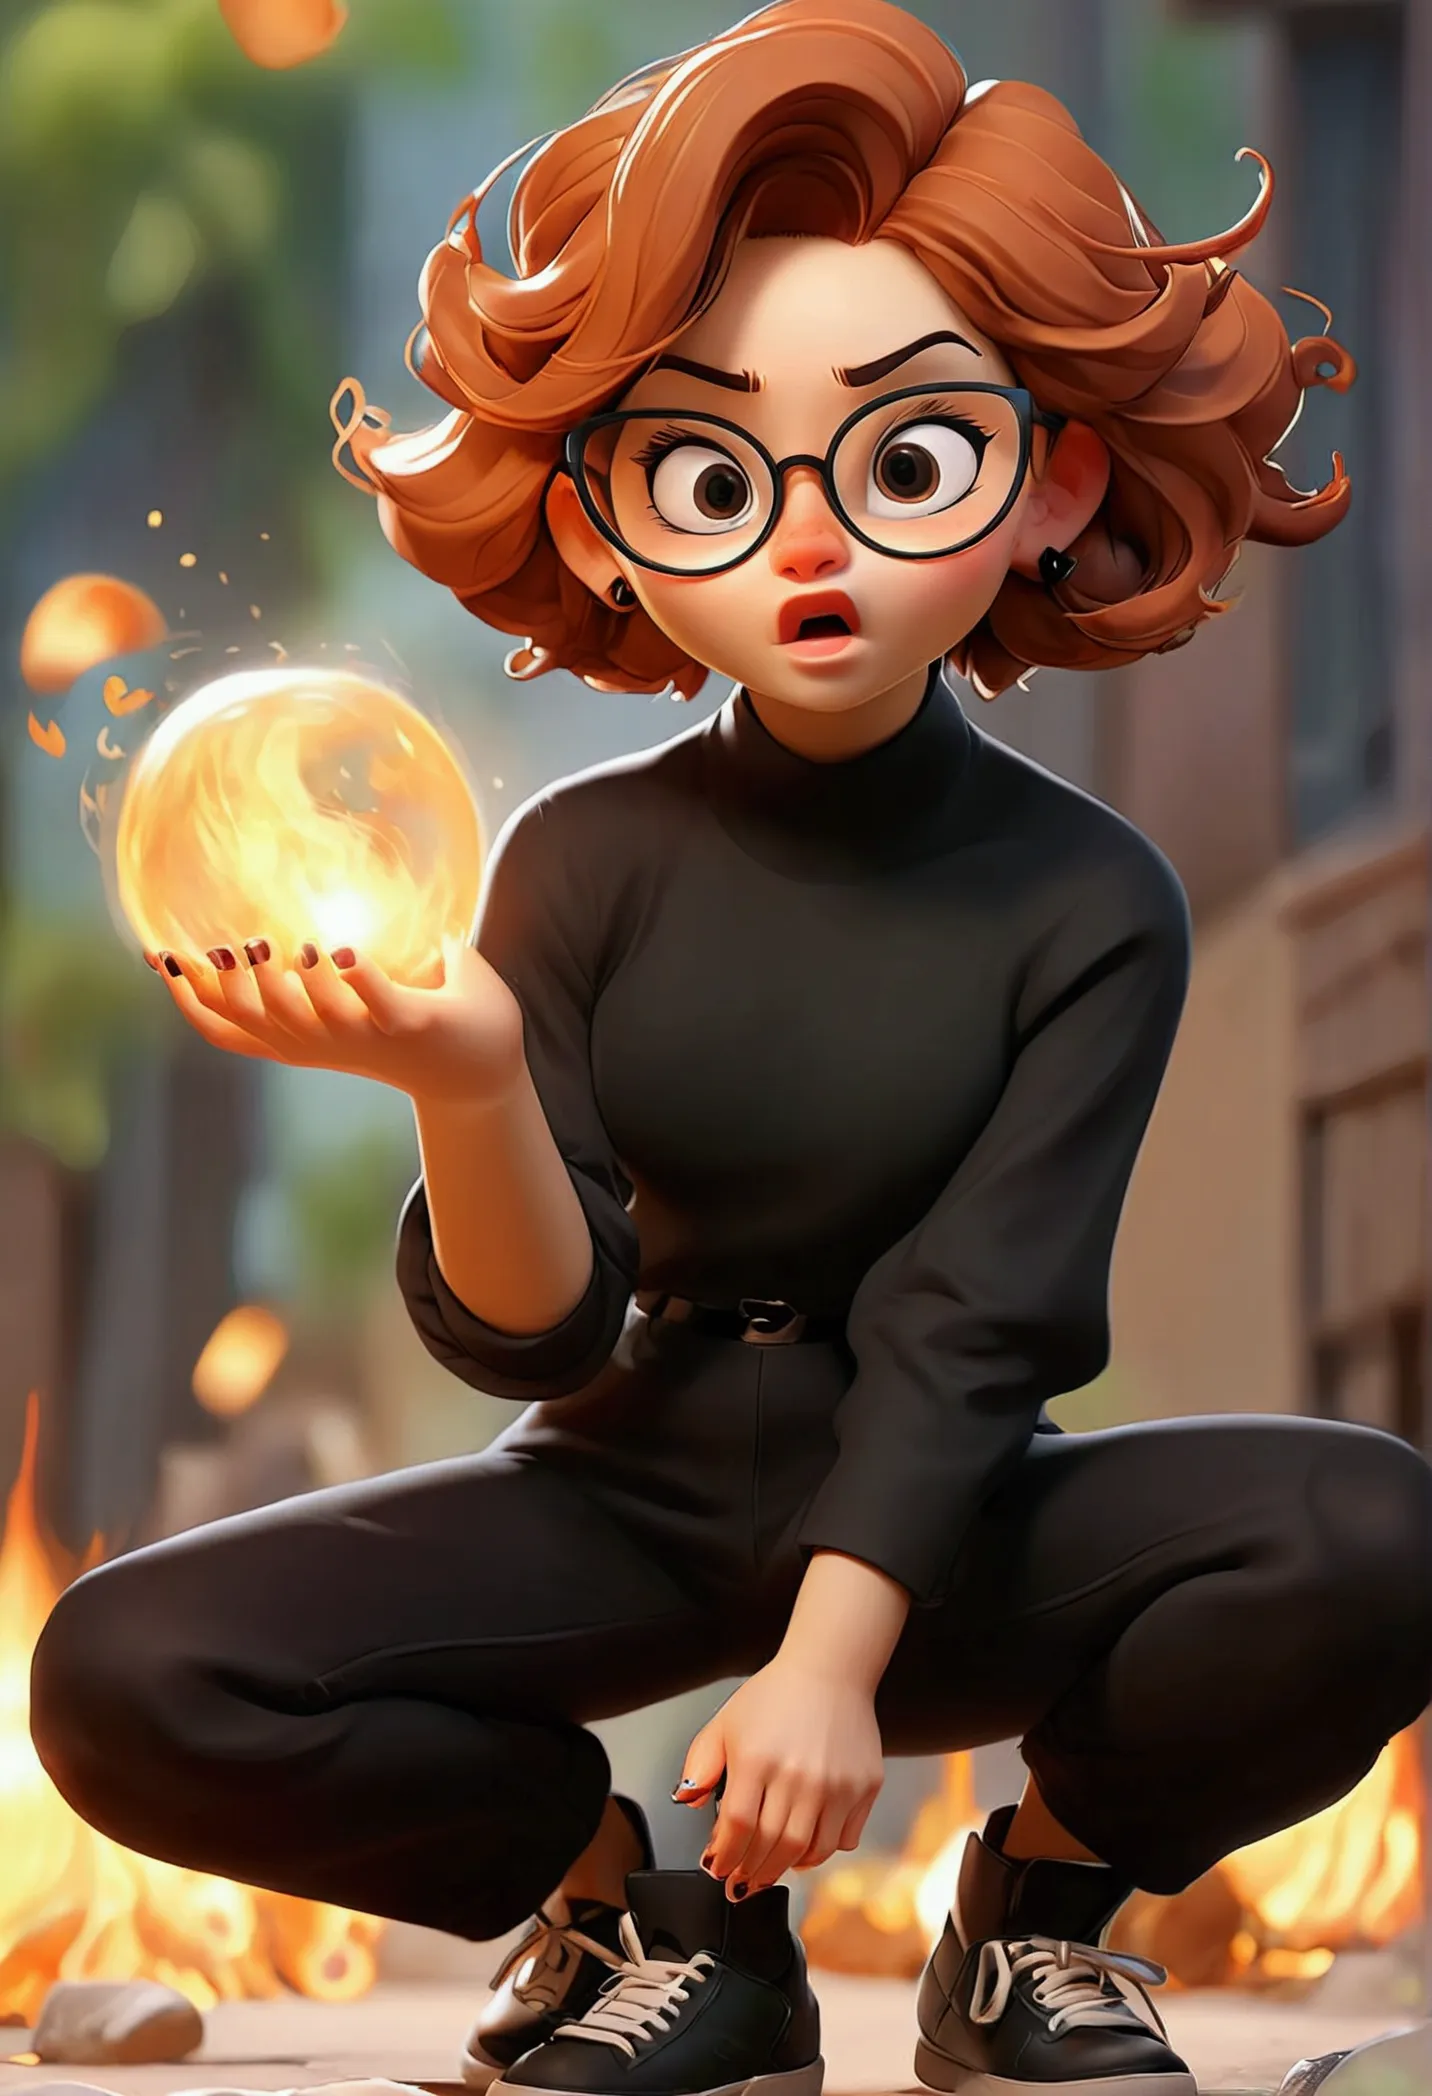 girl with short brown hair similar to jimin from bts, wearing glasses, top pants and black shoes summoning a fireball